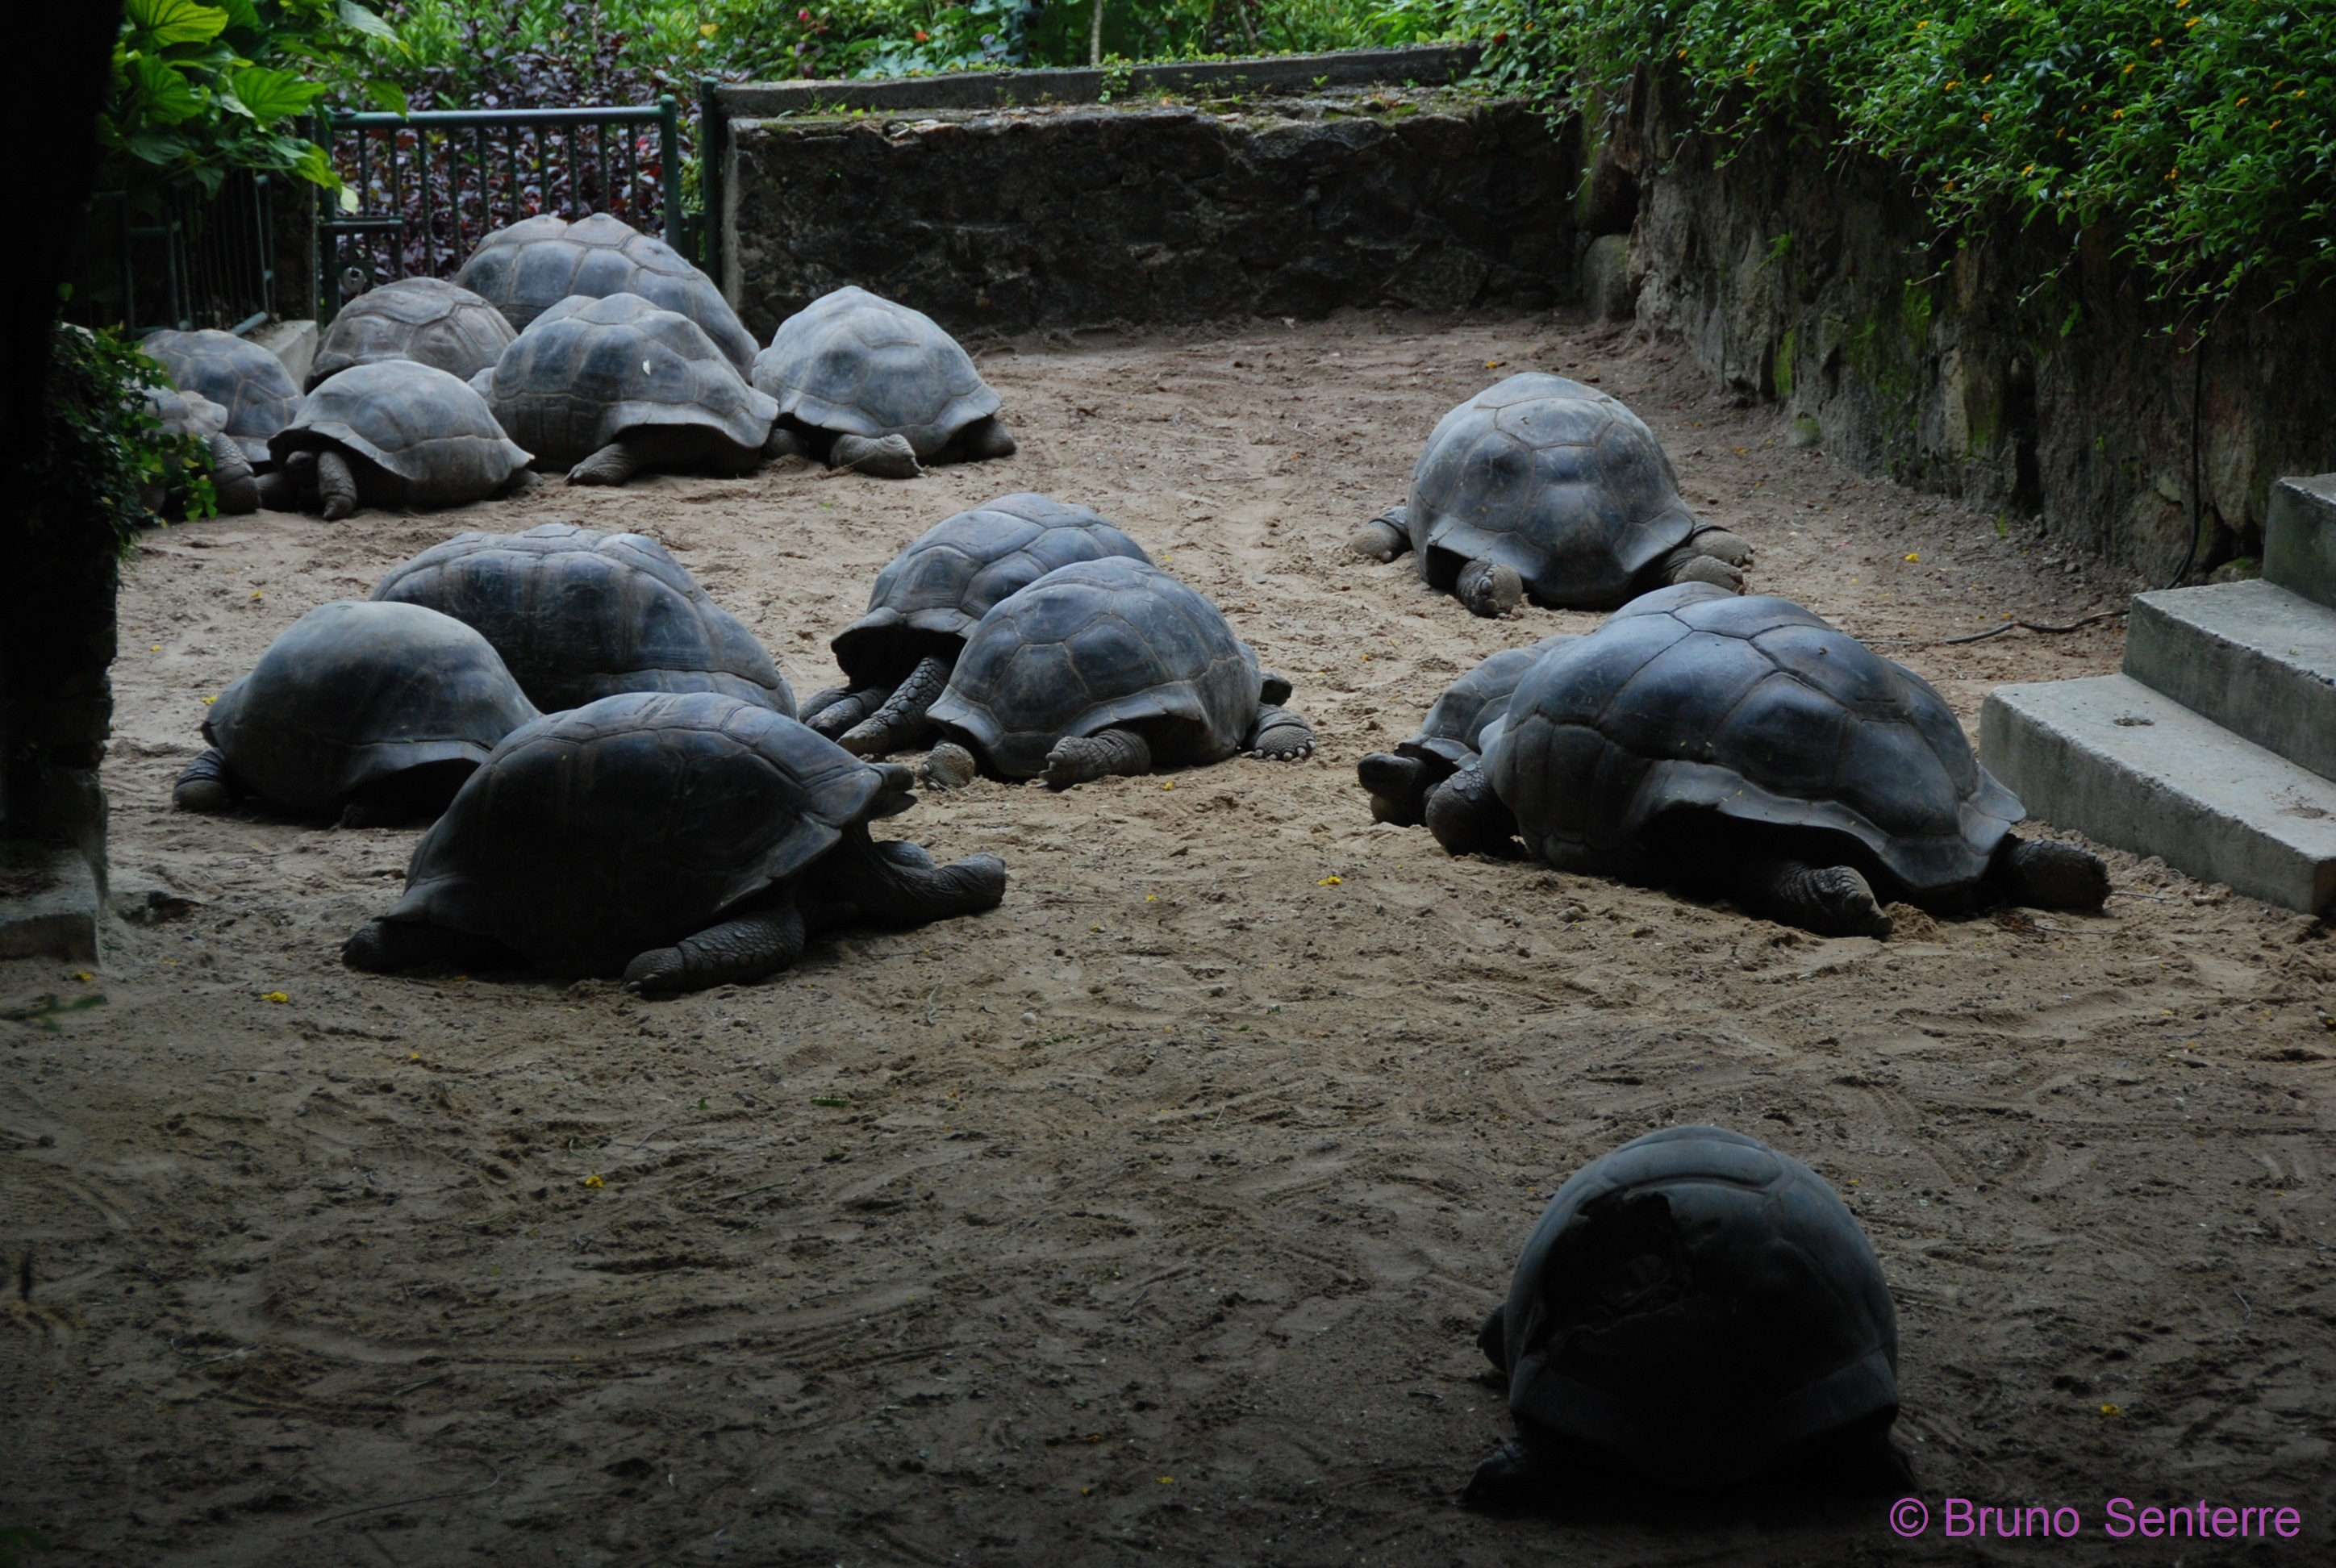 This is the Tortoise Park at the Botanical Gardens